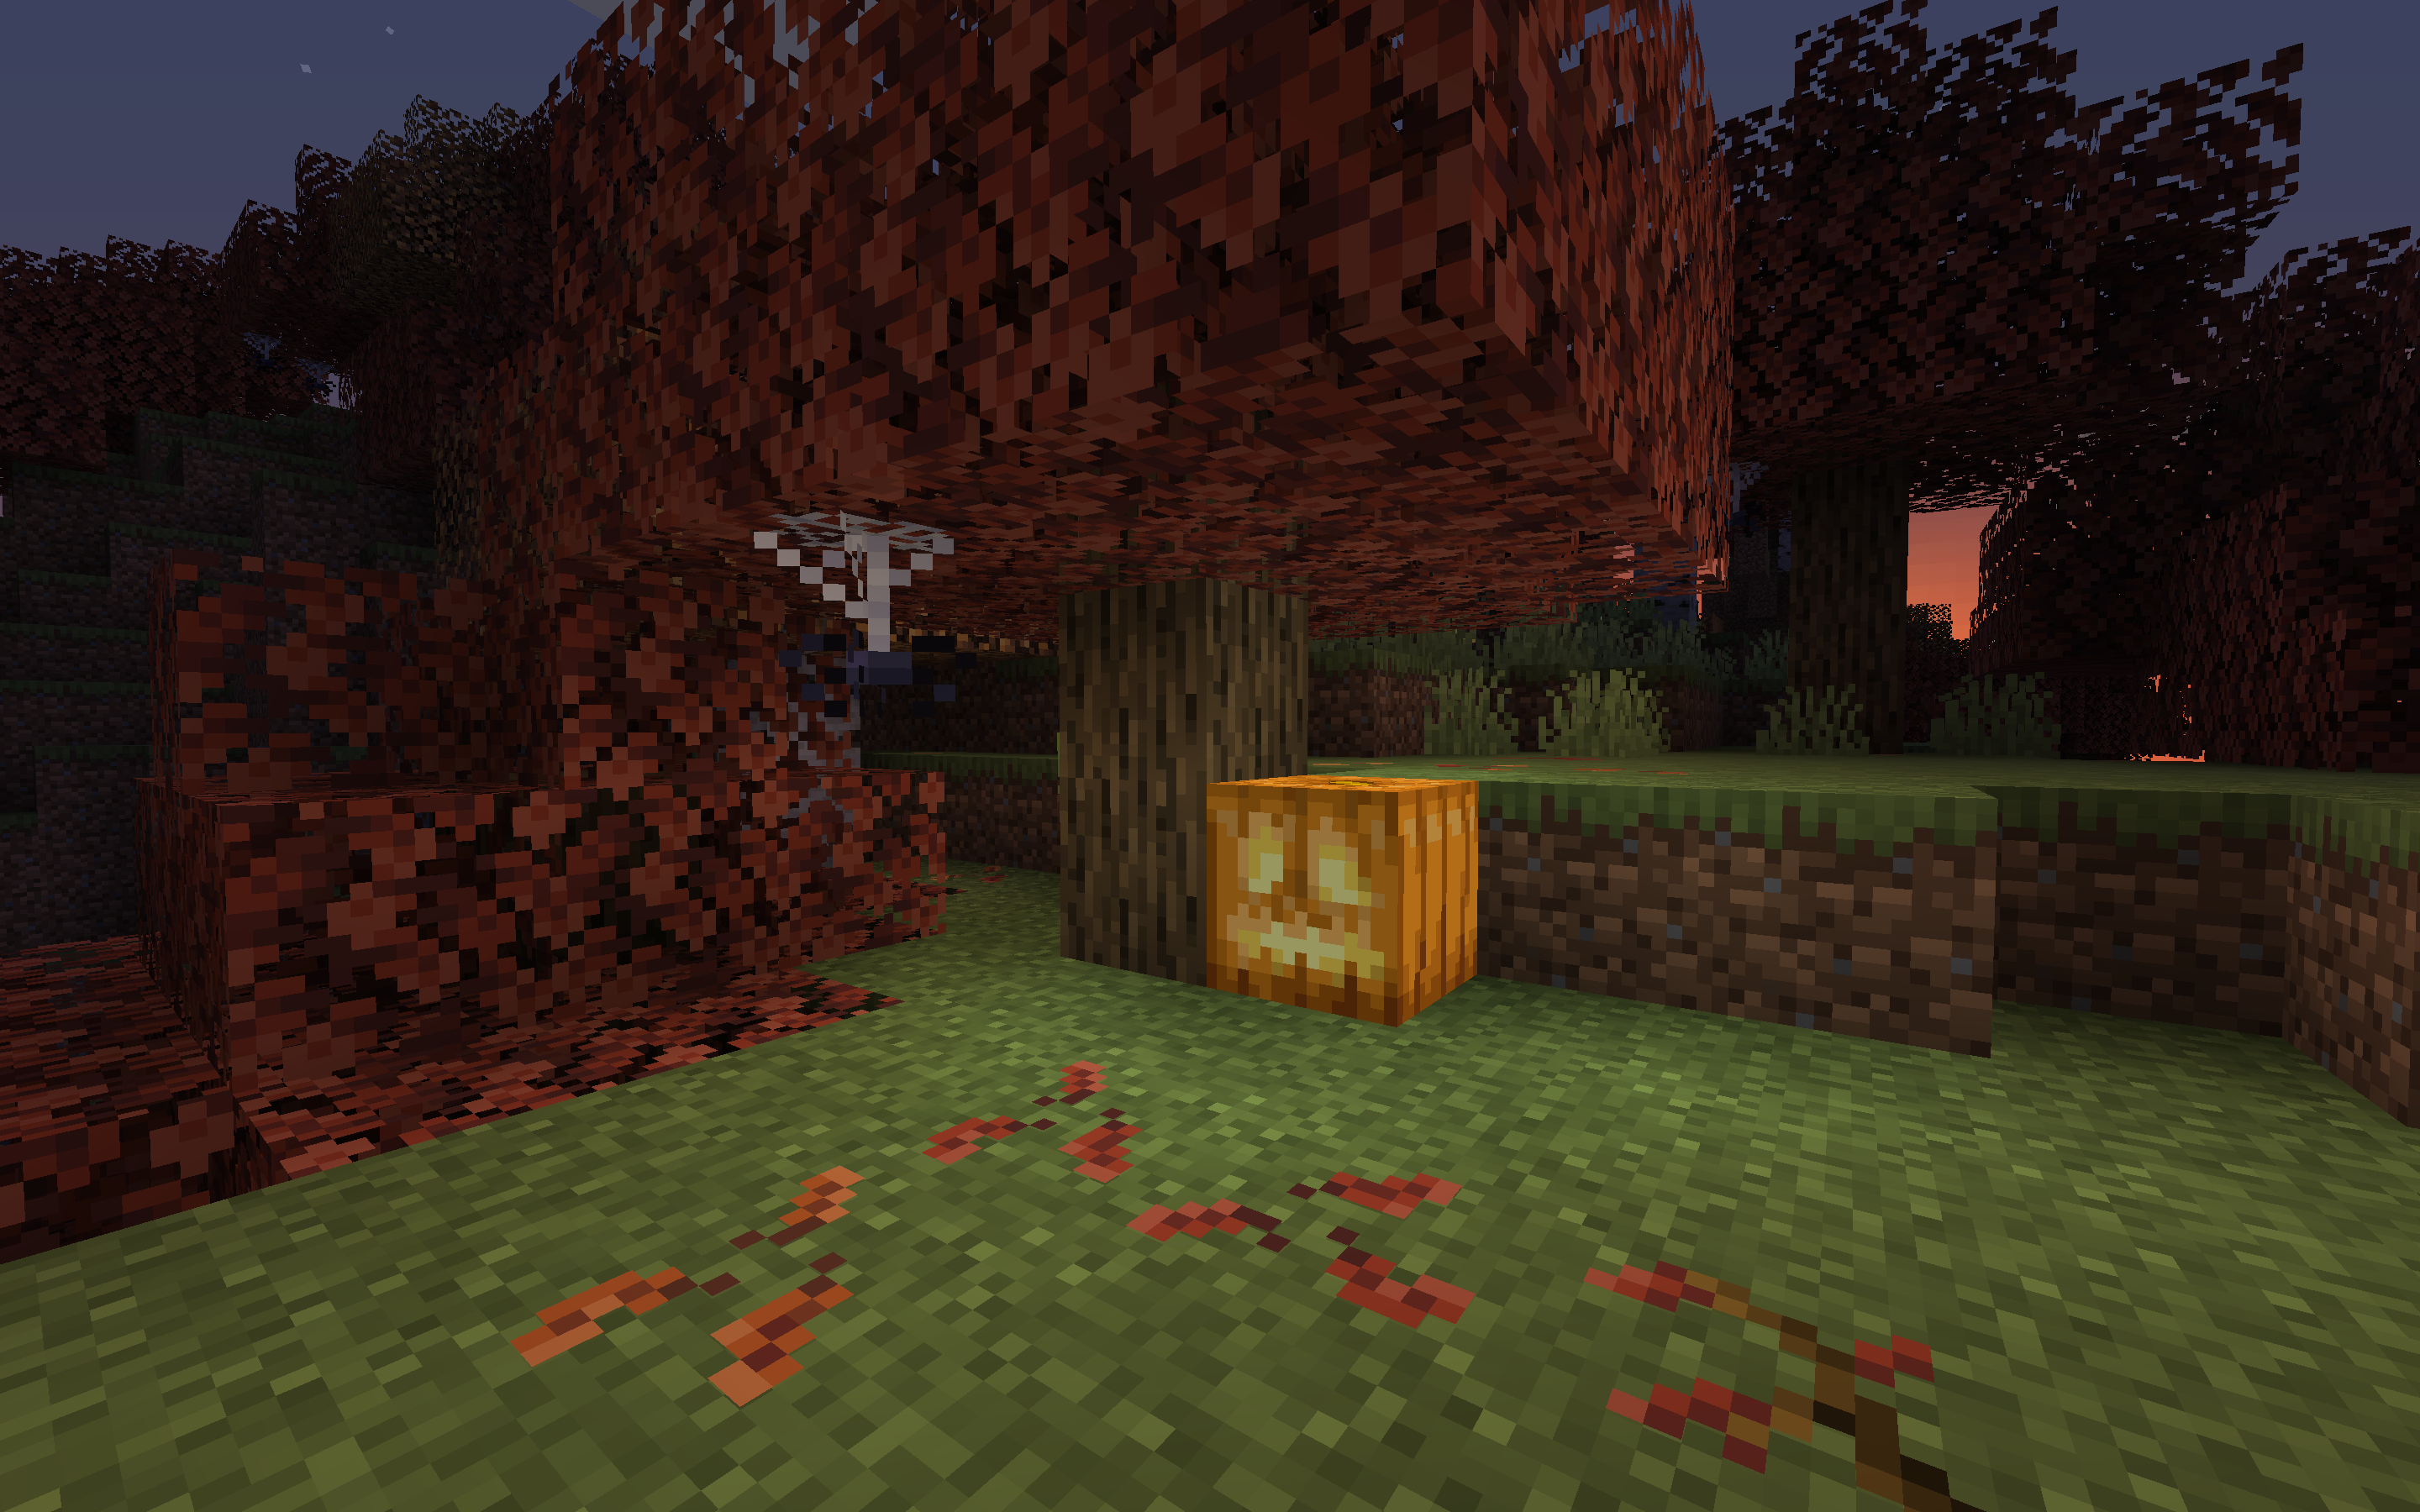 Minecraft Pocket Edition updated with Halloween-themed skin pack, bug fixes  - PhoneArena